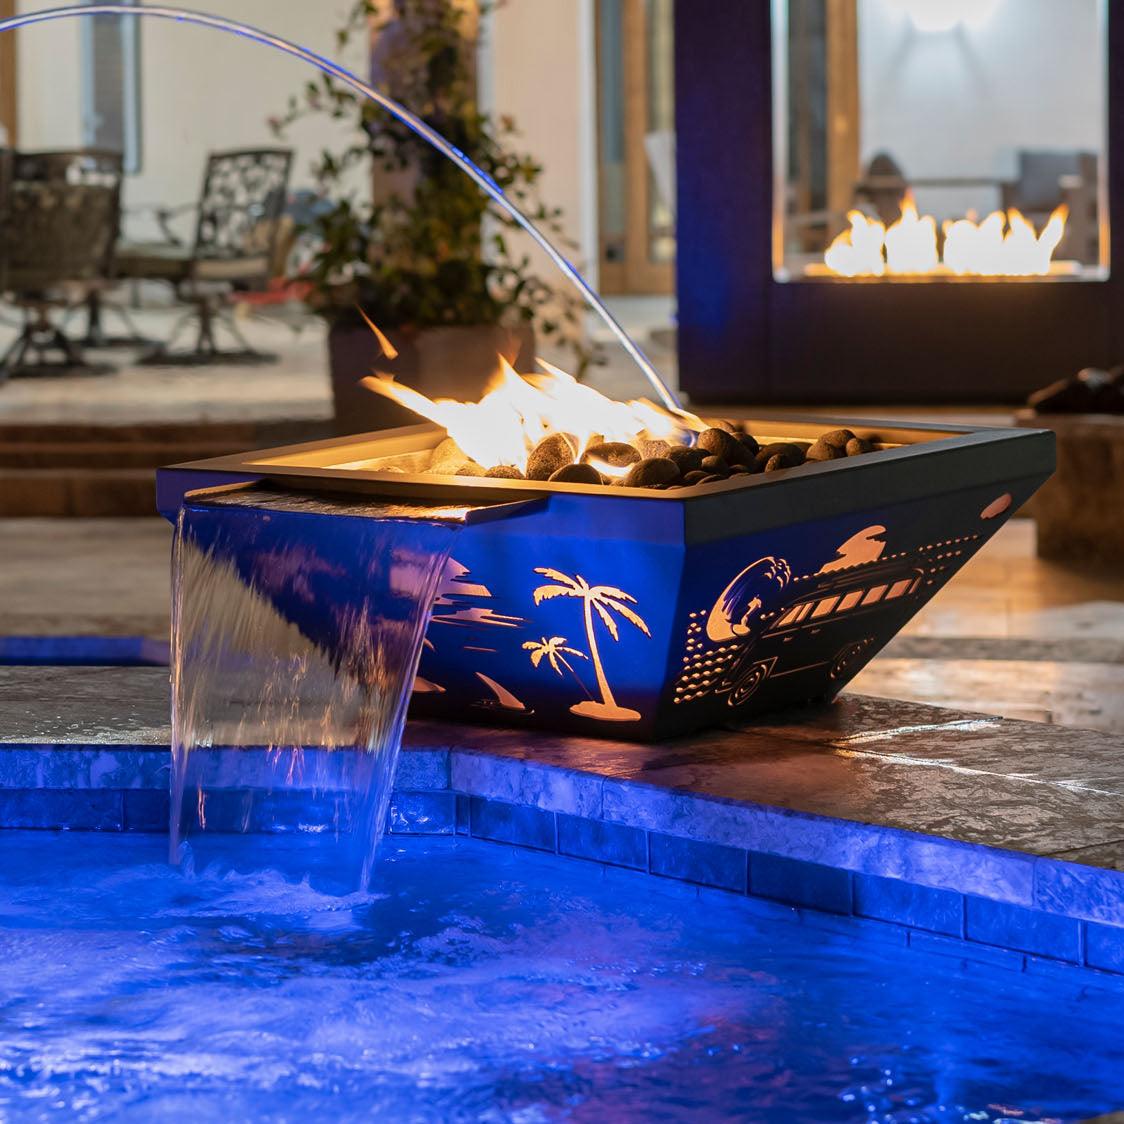 The Outdoor Plus - Light House (Miami) LED Aluminum Powder Coated Fire Bowl OPT-LHFOMIAPC - Fire Pit Stock